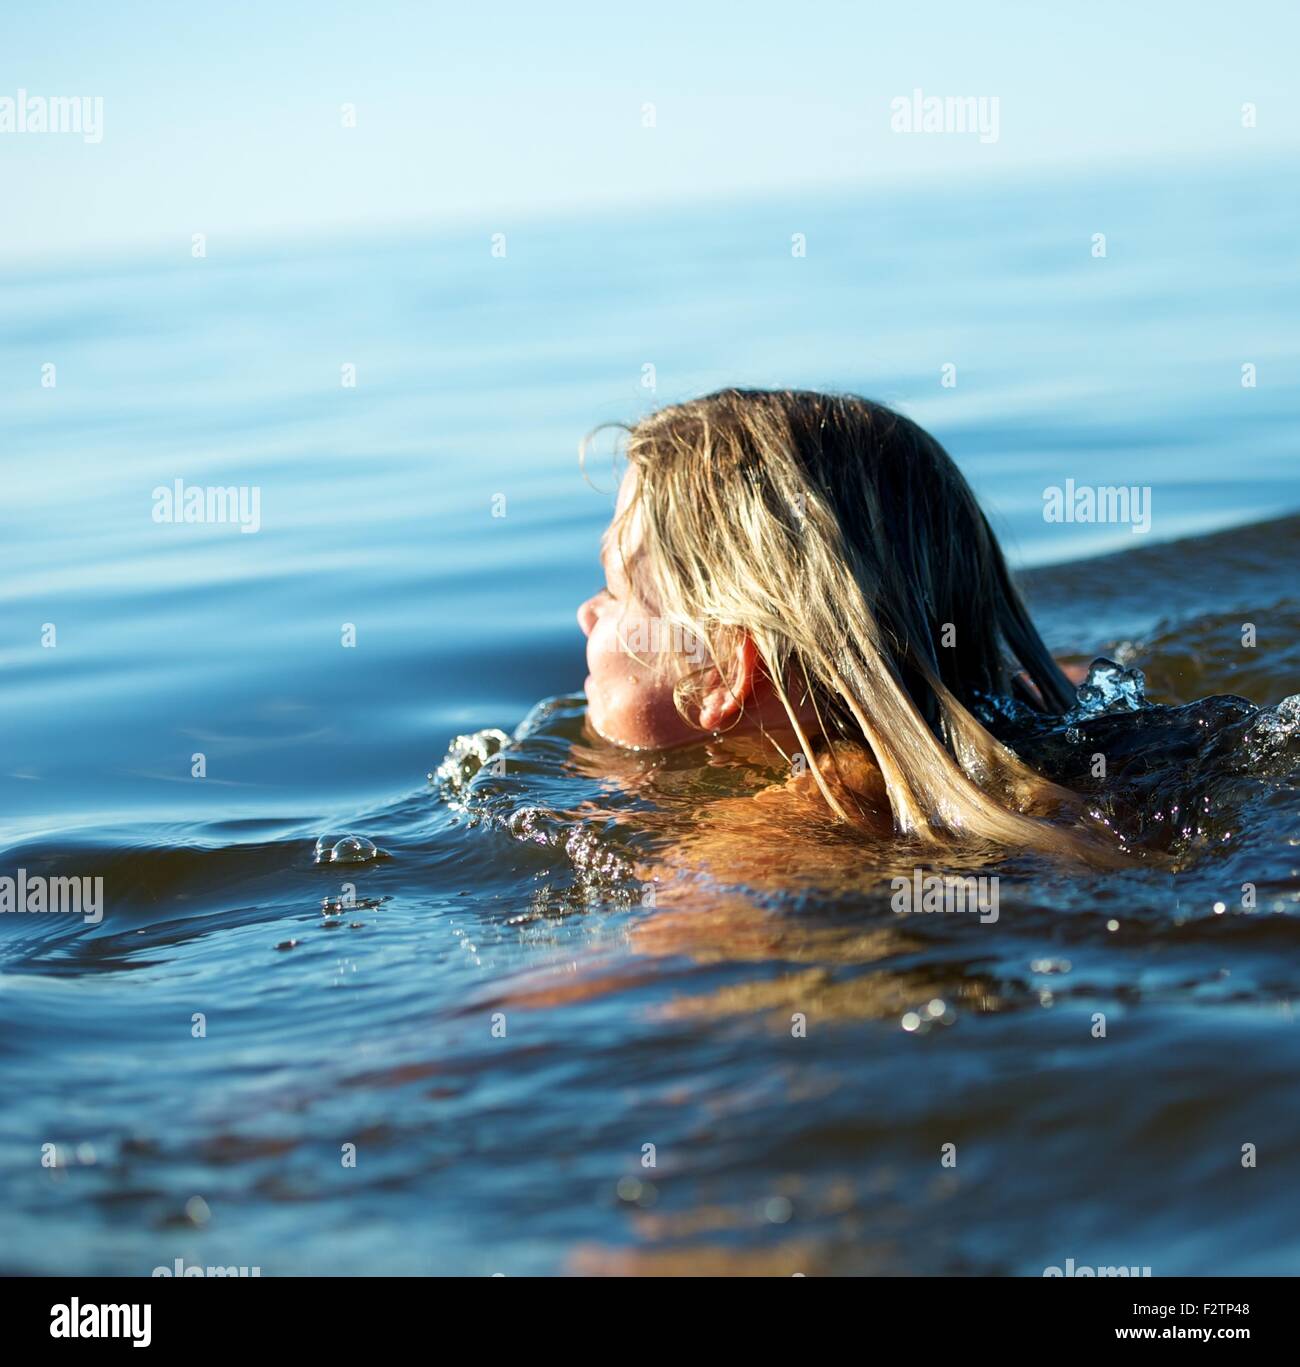 Girl swimming in the water Stock Photo